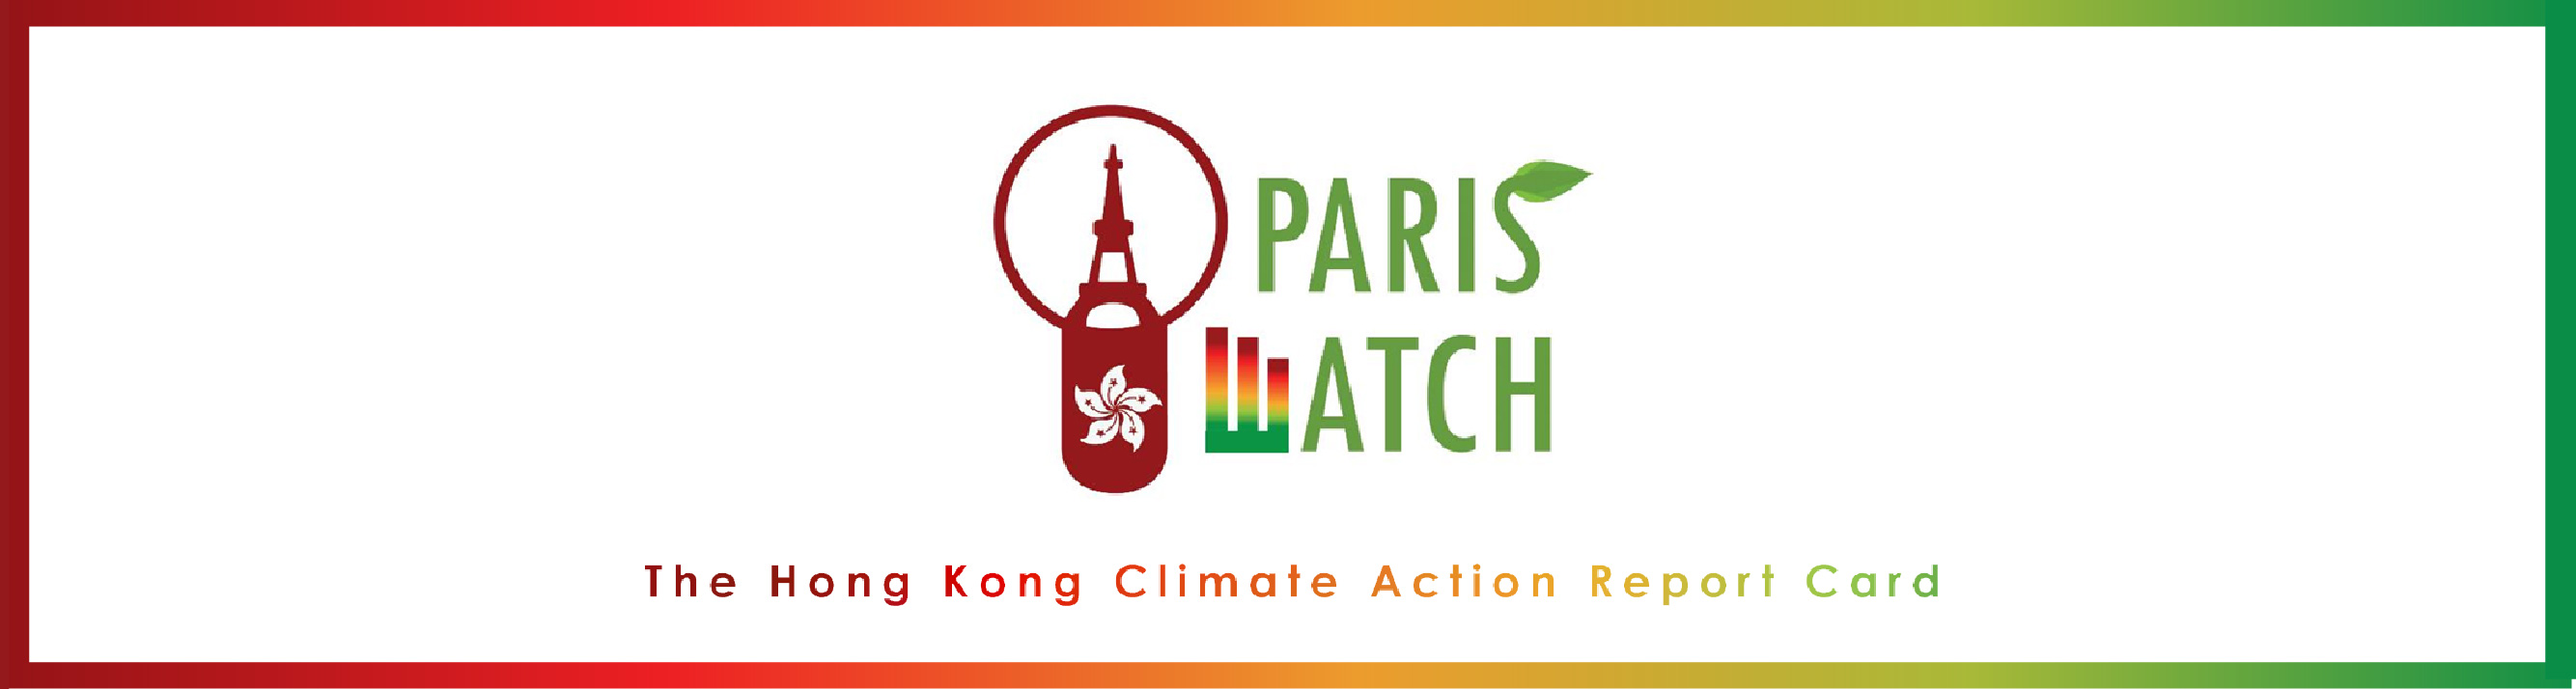 Paris Watch - Accelerating climate action in Hong Kong and the region Top Banner